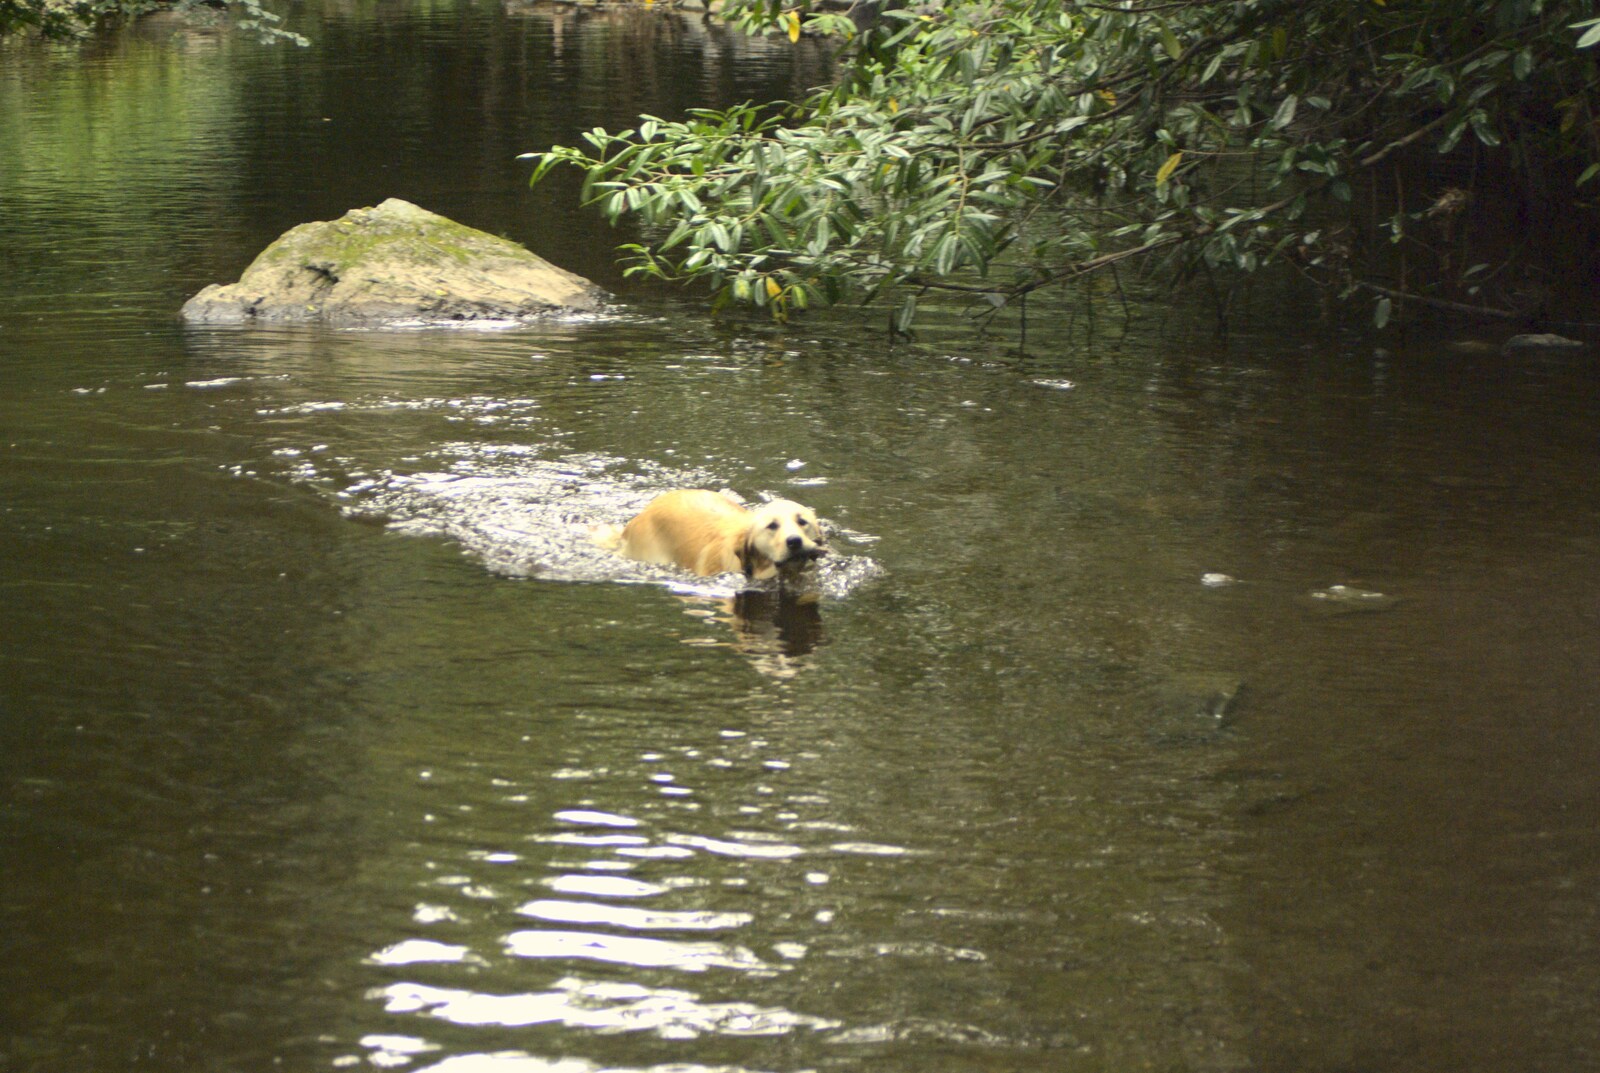 A dog with a stick, in the river from A Walk in Devil's Glen, County Wicklow, Ireland - 31st July 2010